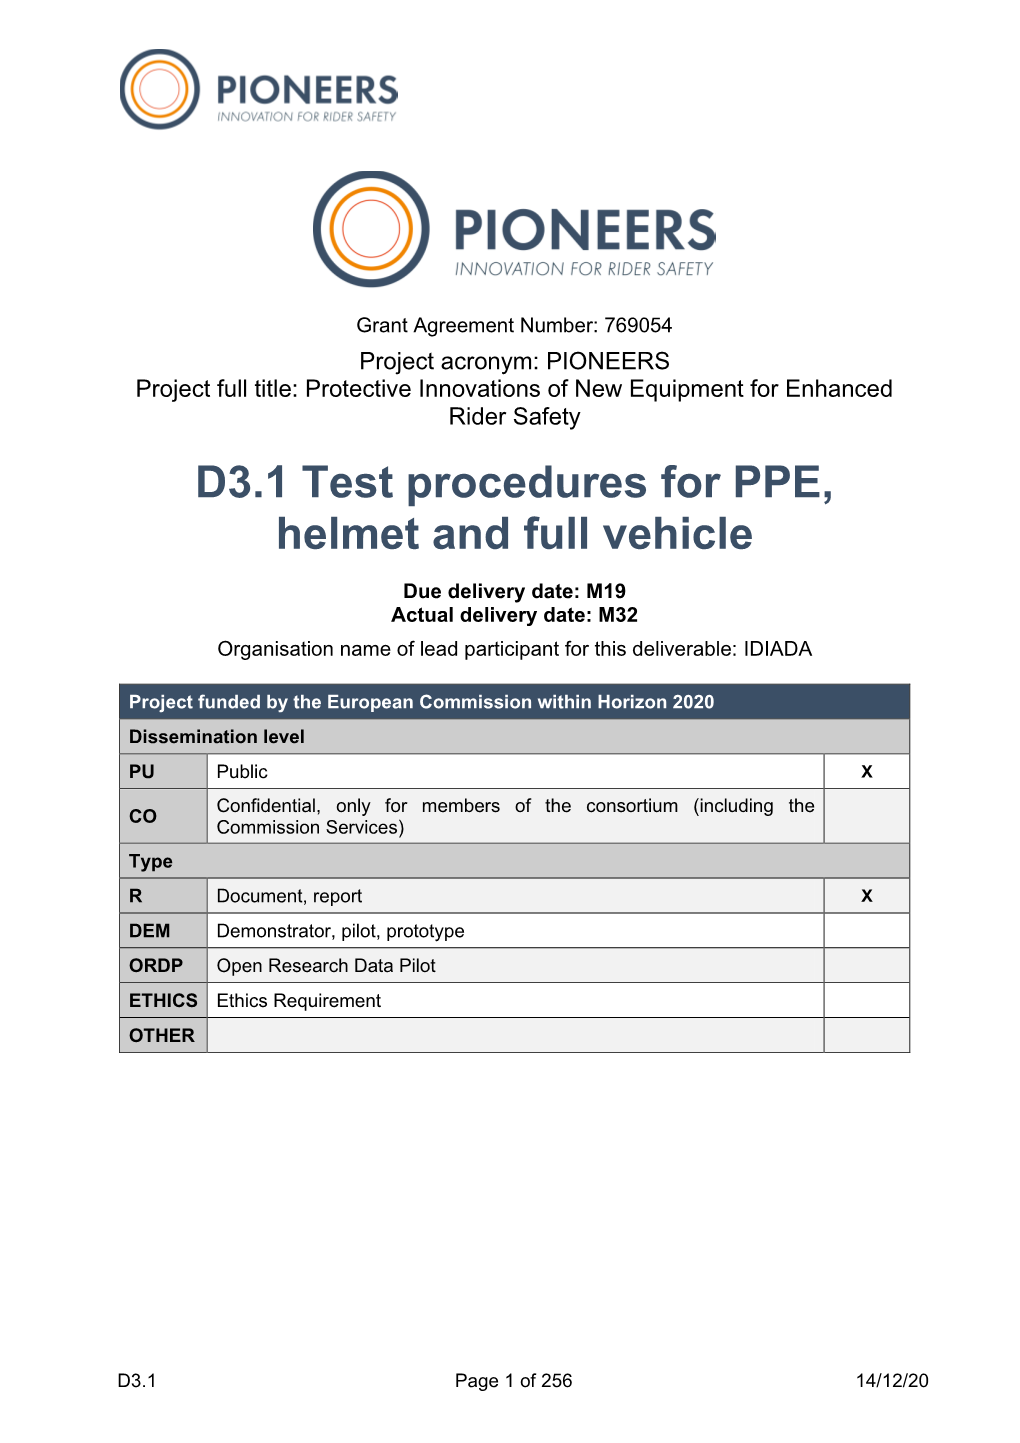 D3.1 Test Procedures for PPE, Helmet and Full Vehicle